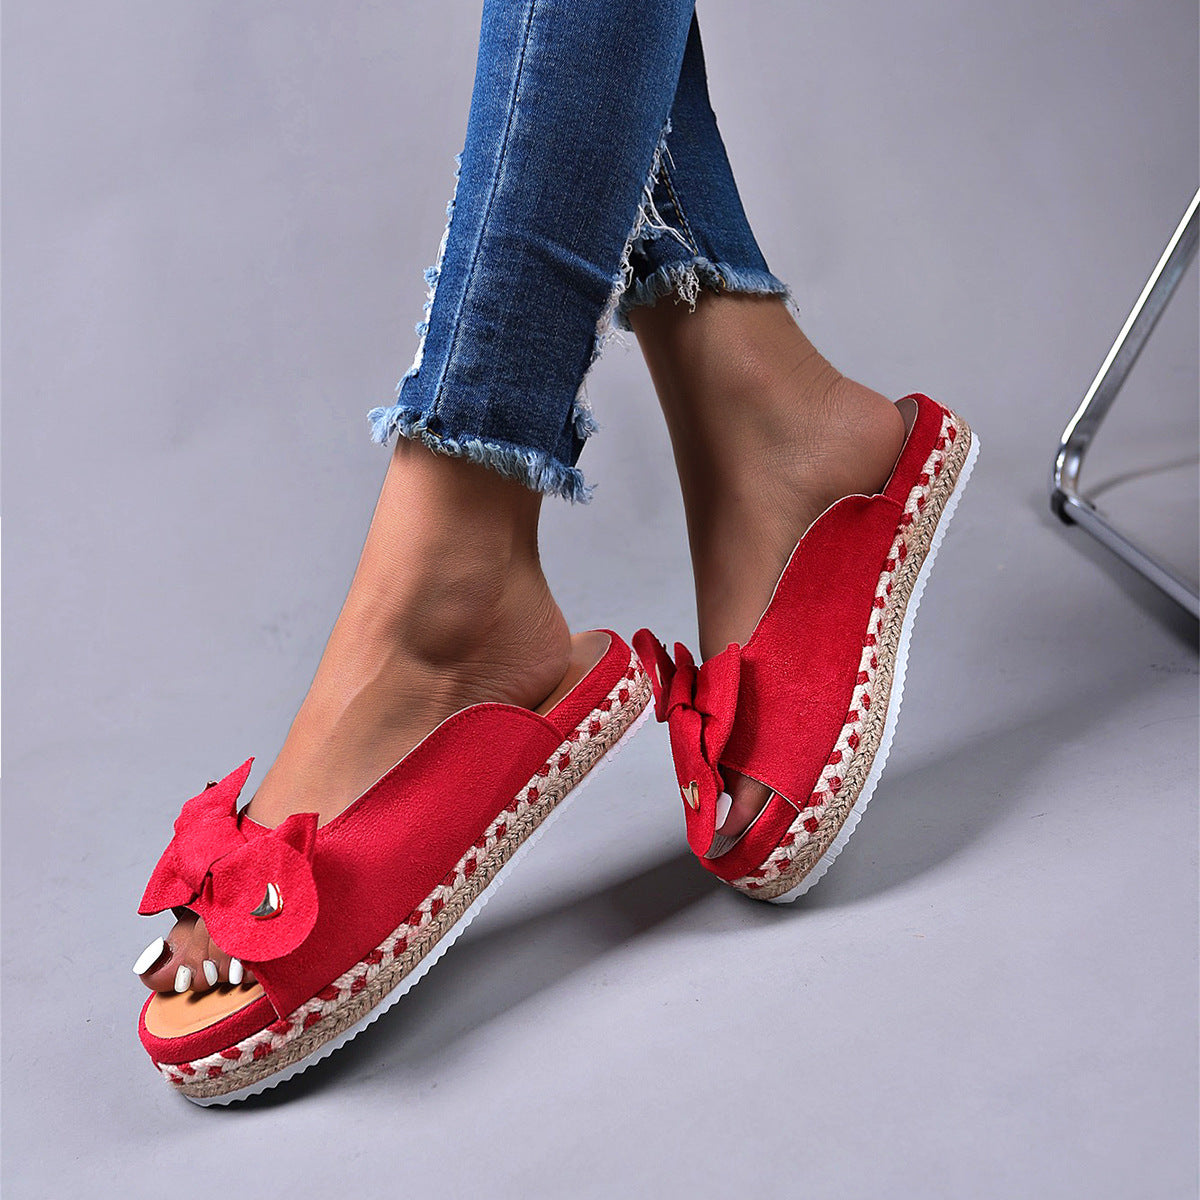 Women's Bow Slippers Flat Heel Peep Toe Sandals Summer Solid Color Beach Shoes